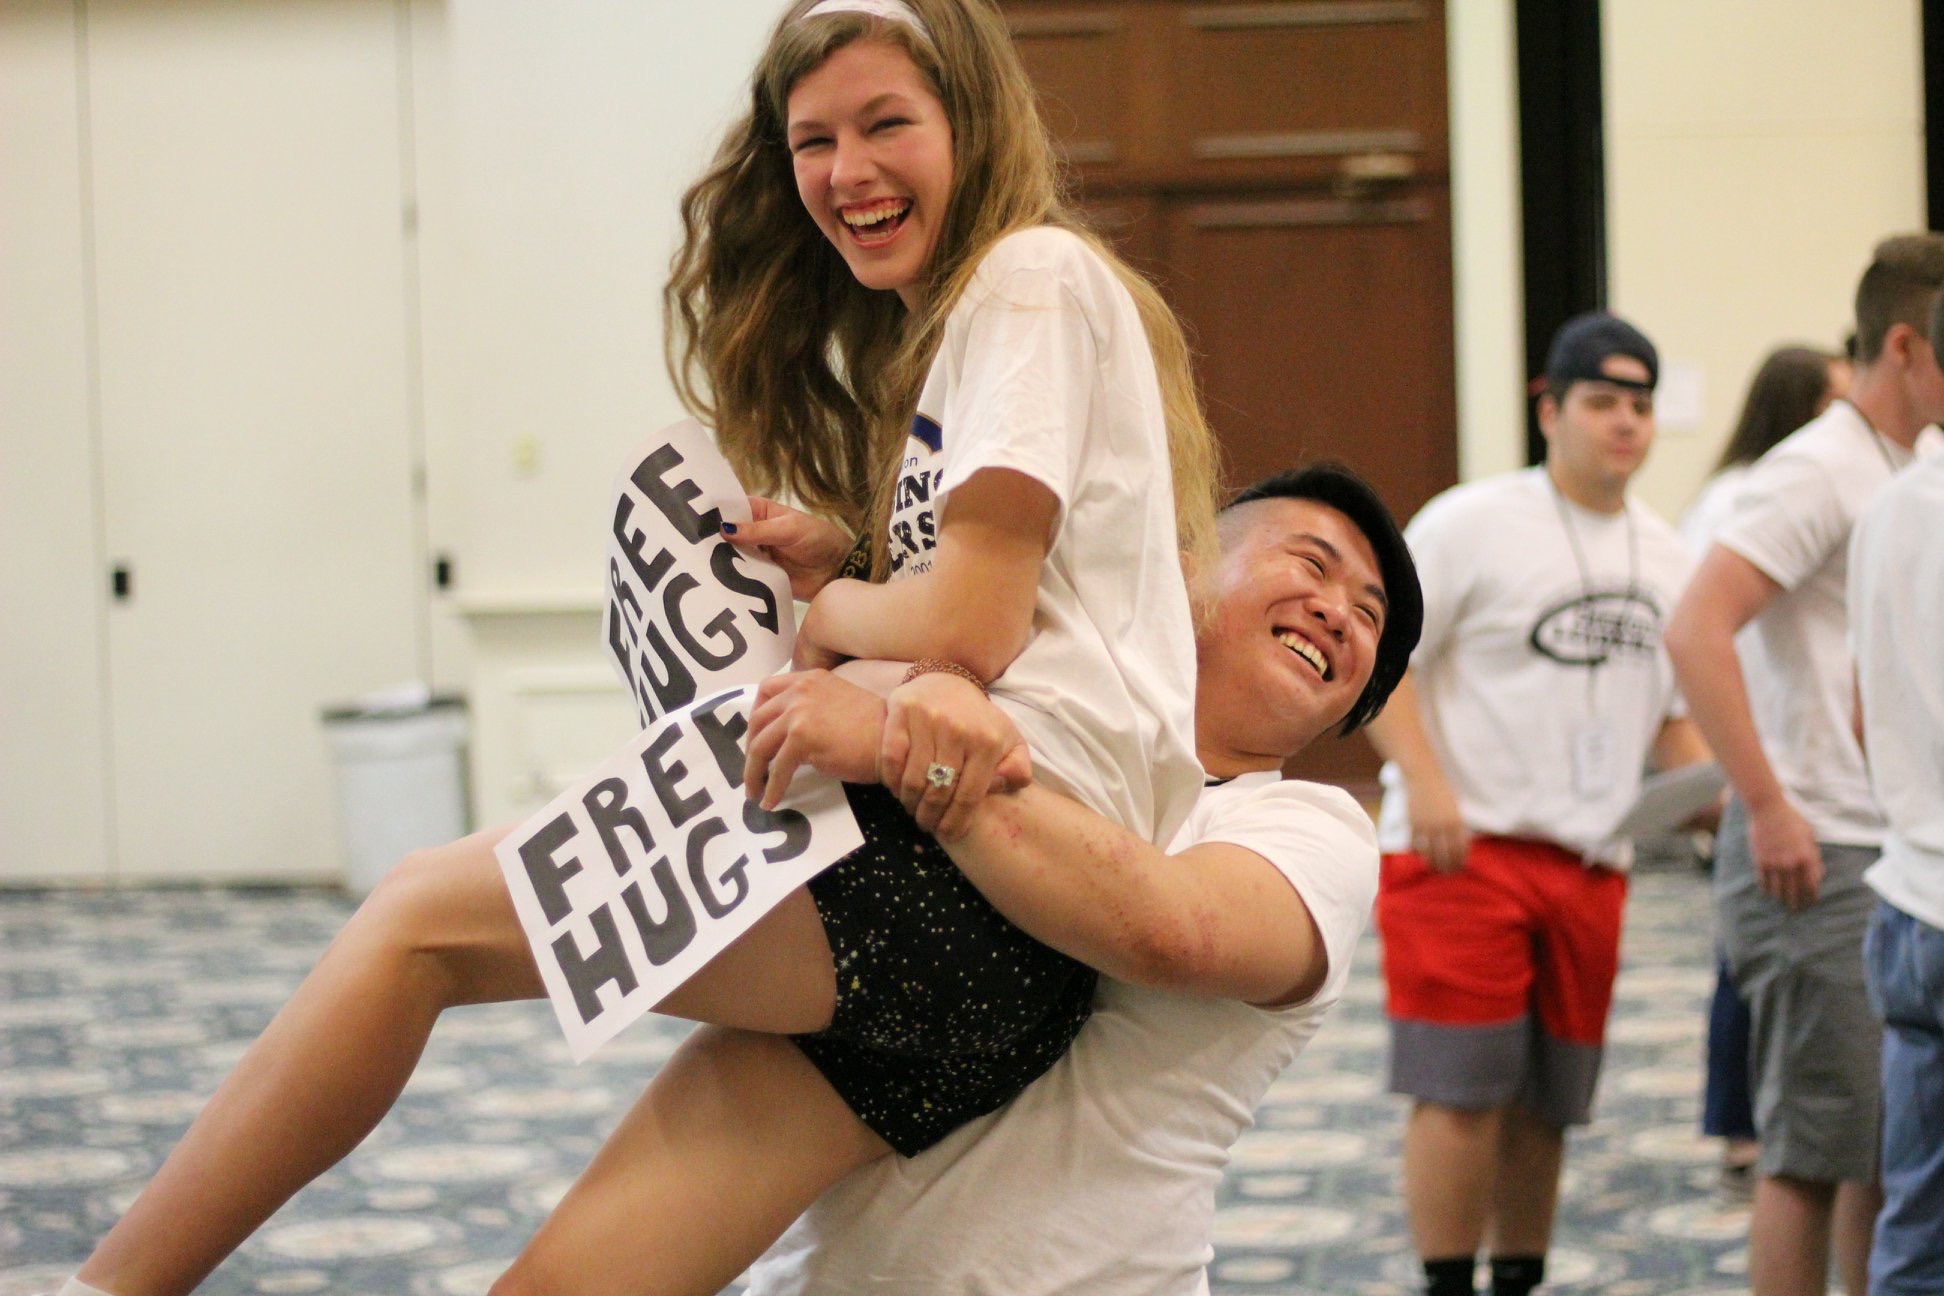 The Future of Free Hugs During The COVID-19 Pandemic - Swift Kick